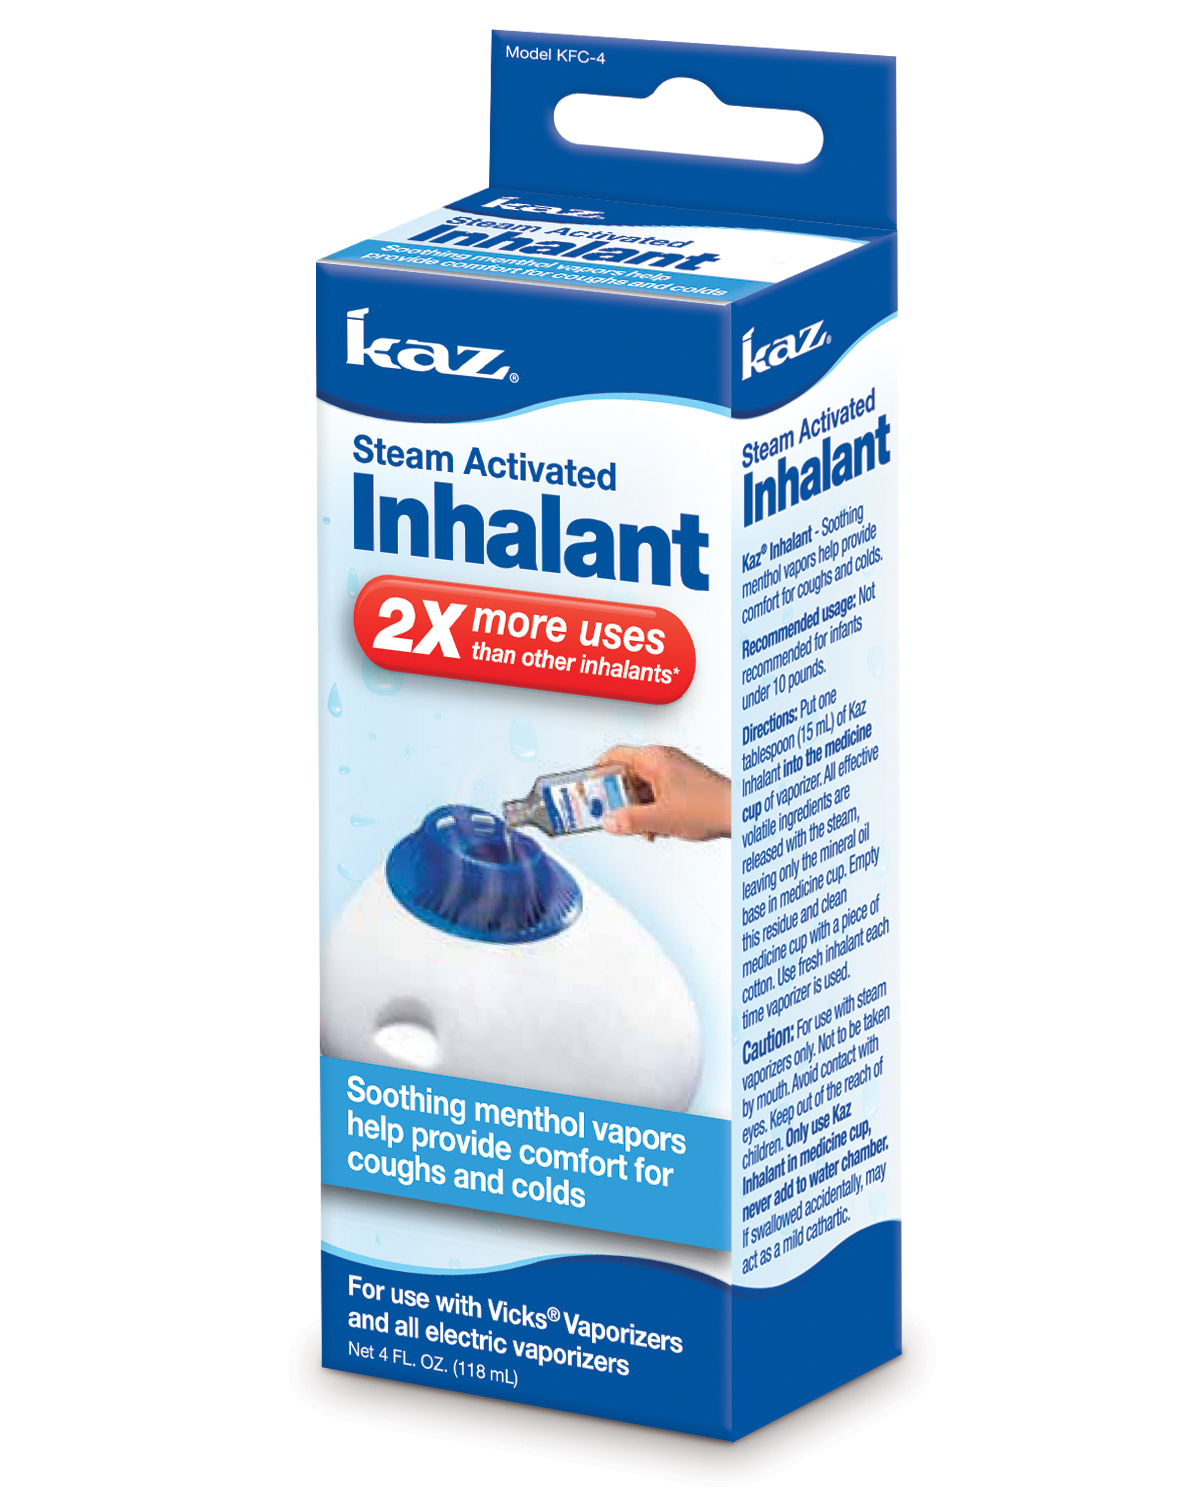 Kaz Inhalant for Humidifiers - image 2 of 2